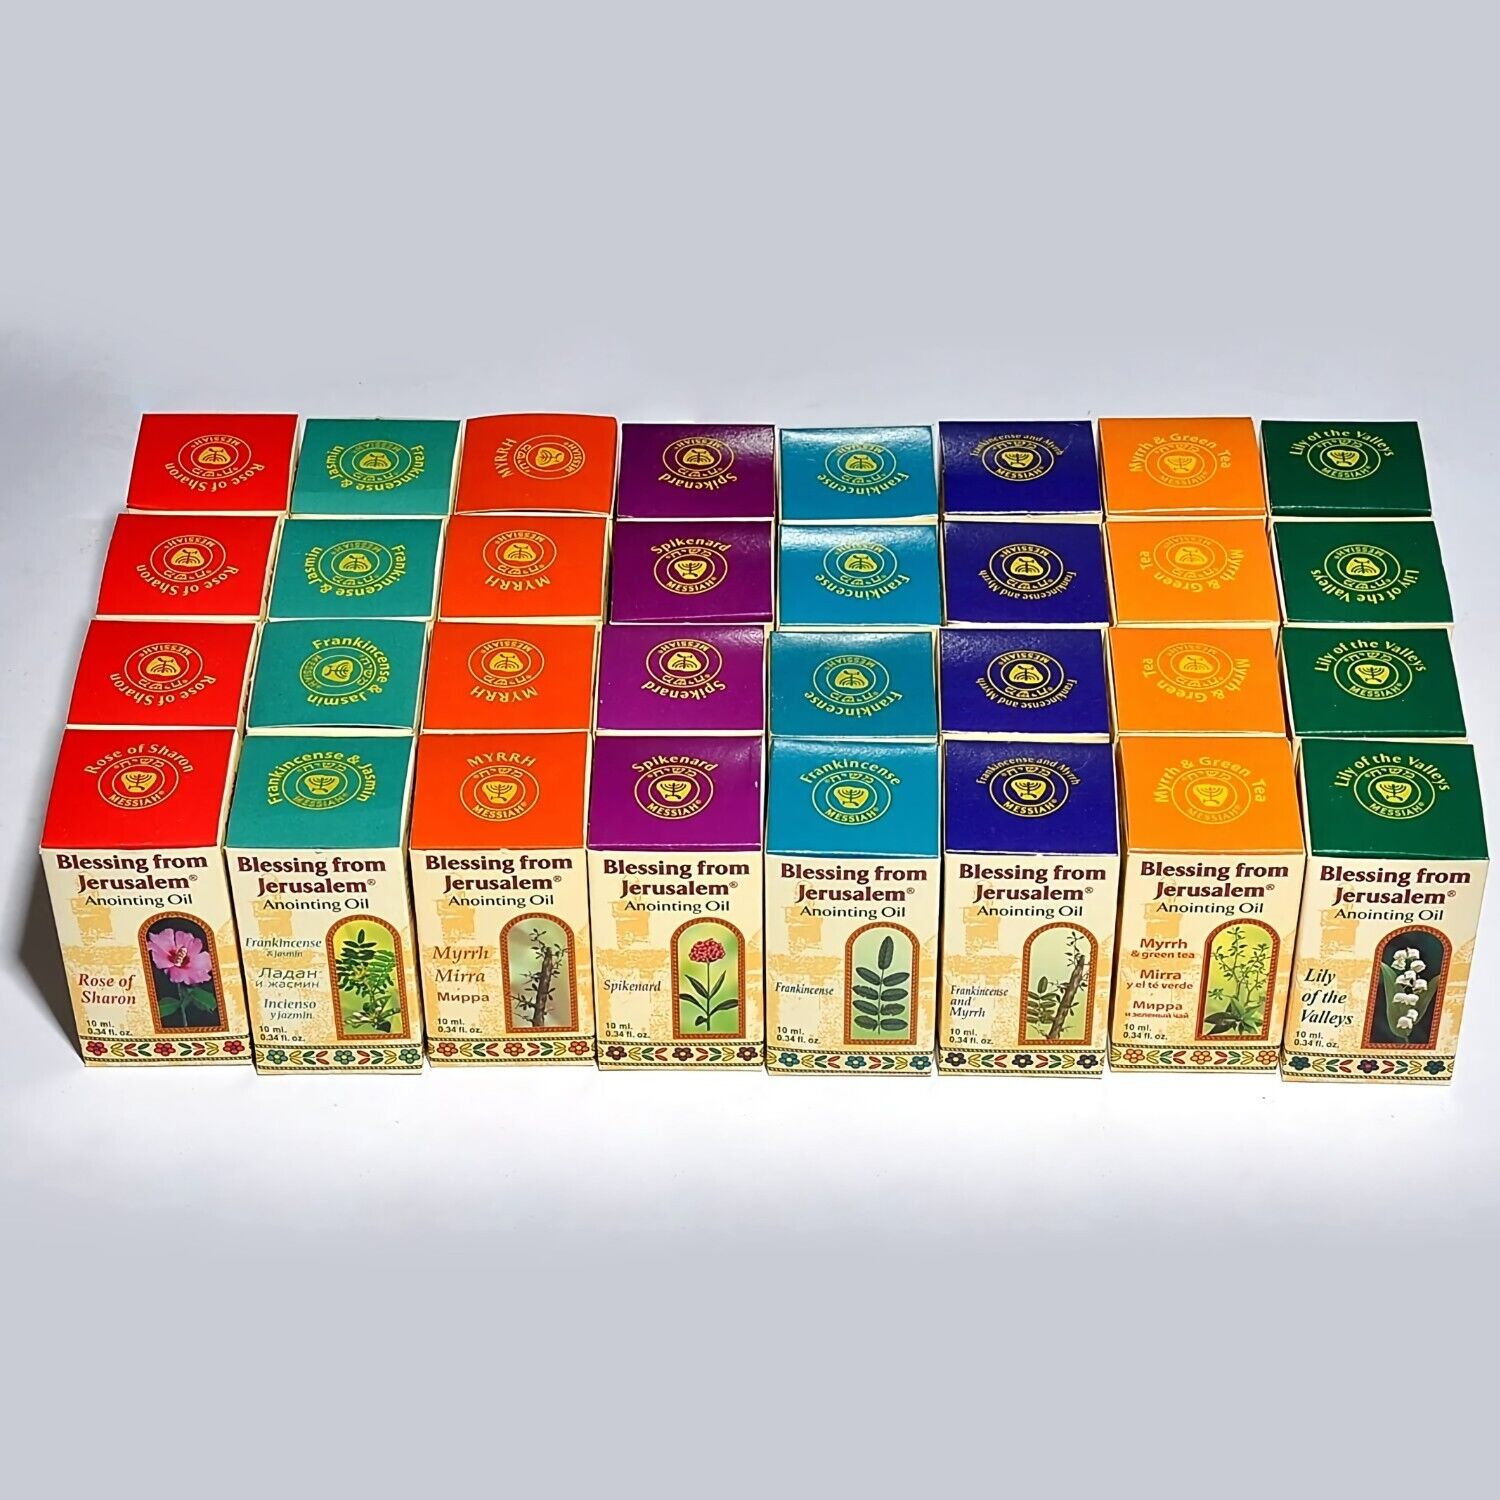 Lot of 32 x Mix Anointing Oils 12 ml - 0.4 oz. from The Holyland (32 Bottles)